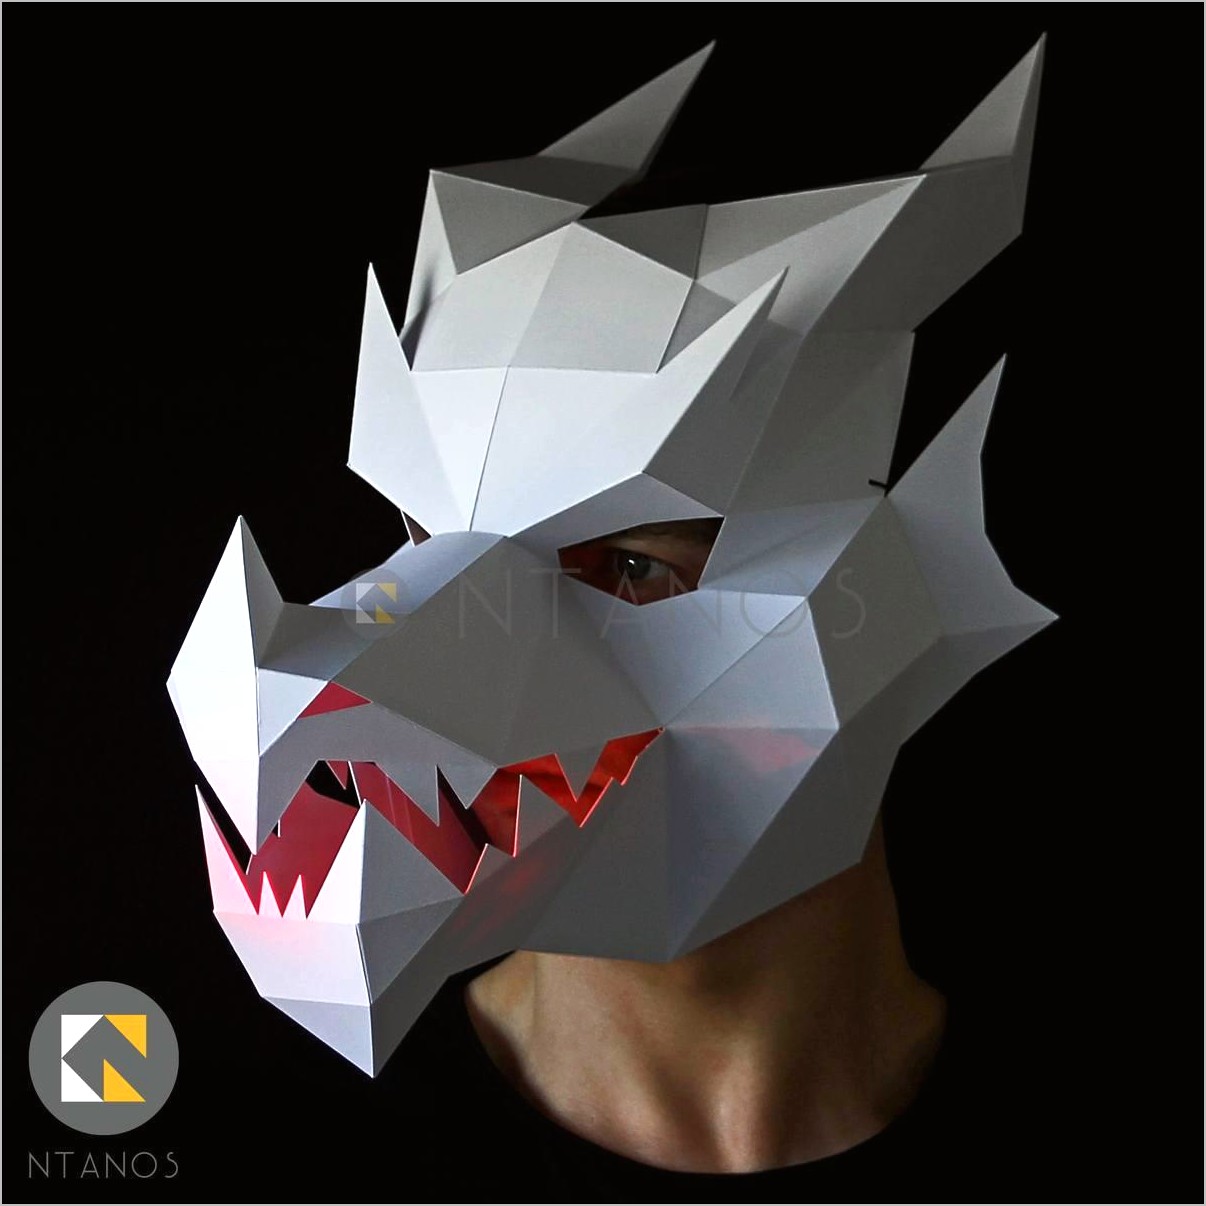 3d Paper Mask Template Free Printable